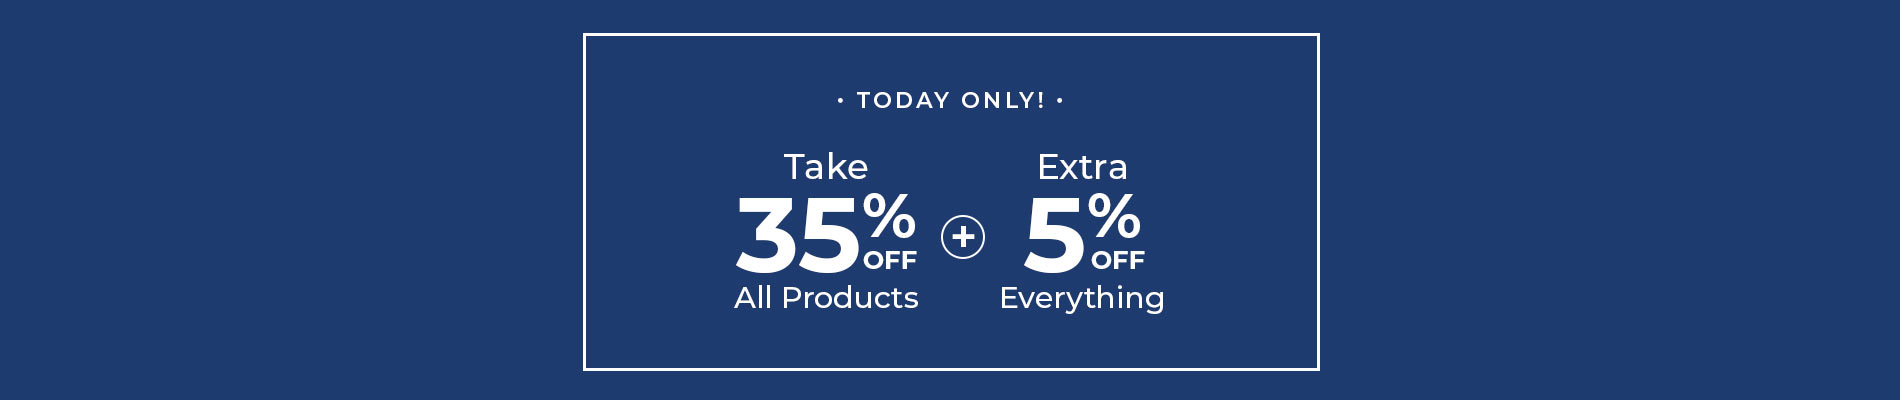 Take 35% Off + Extra 5% Off Everything